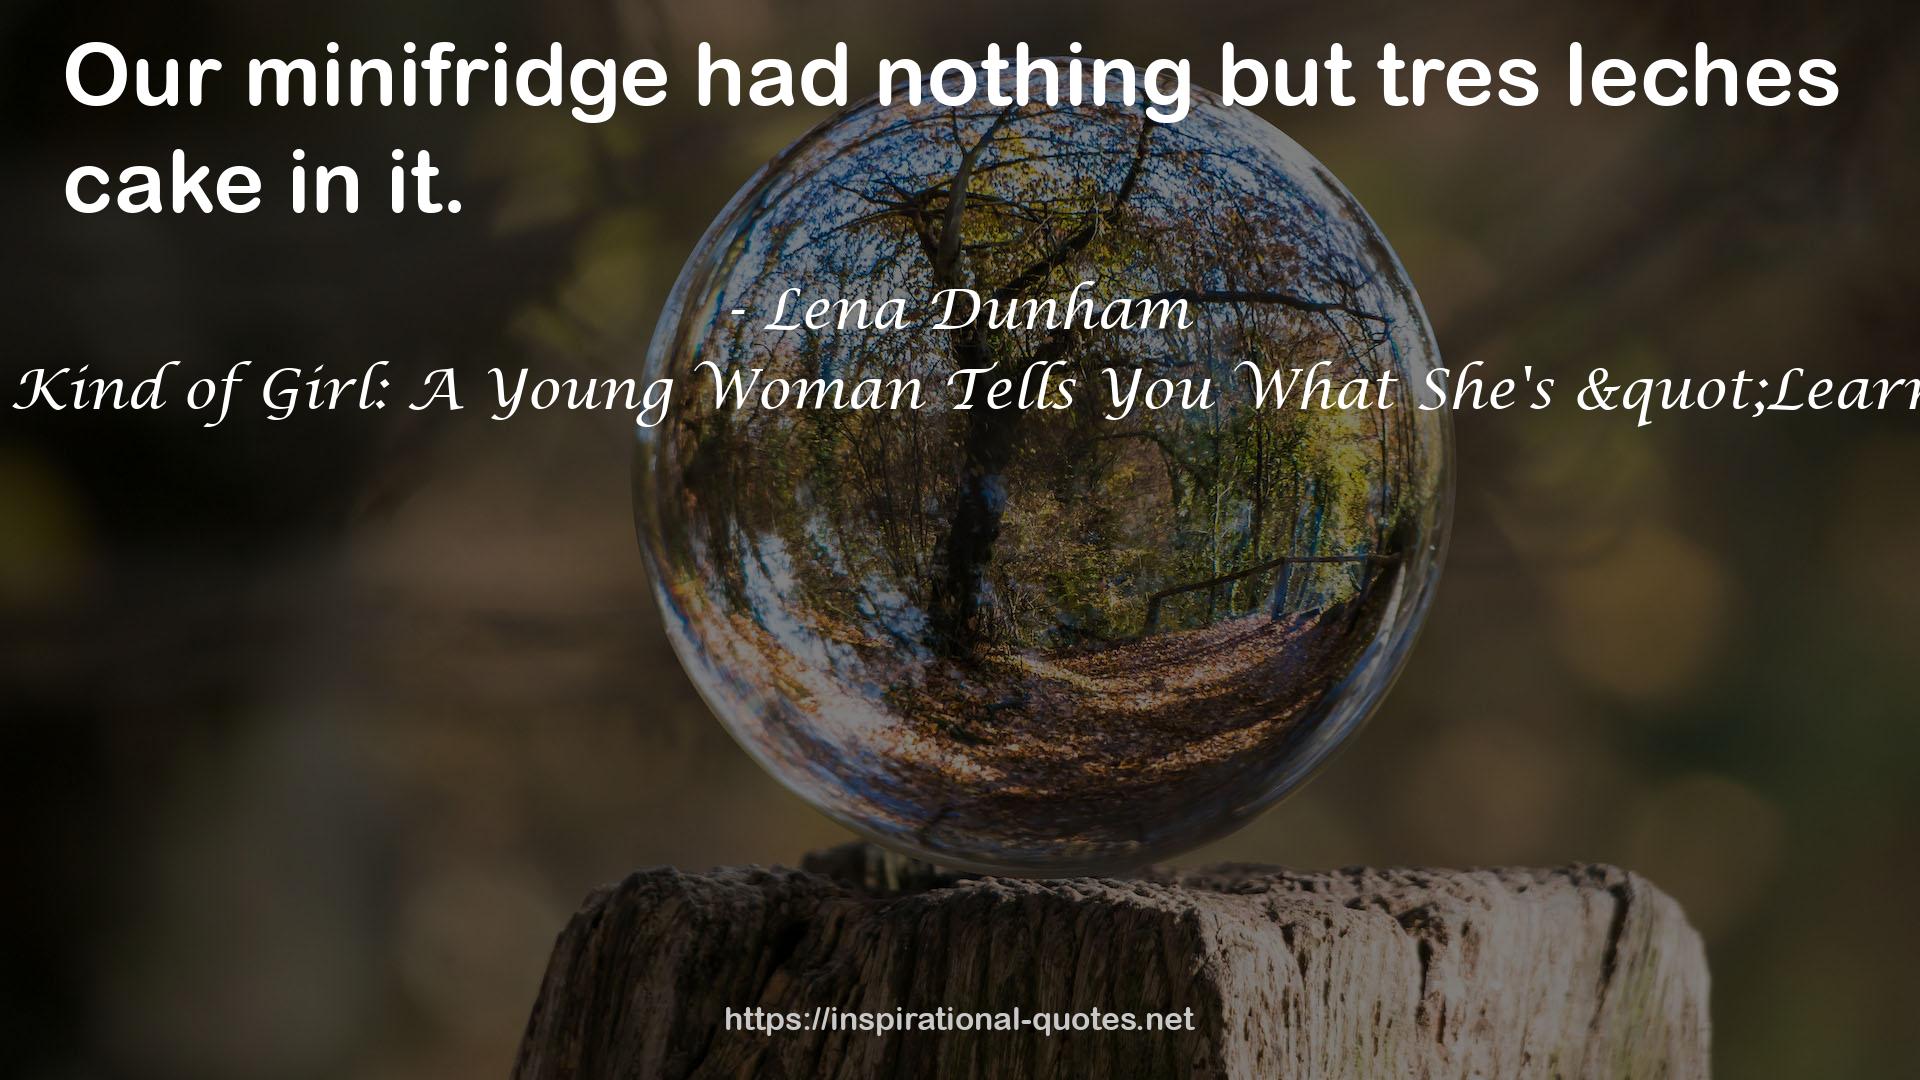 Not That Kind of Girl: A Young Woman Tells You What She's "Learned" QUOTES